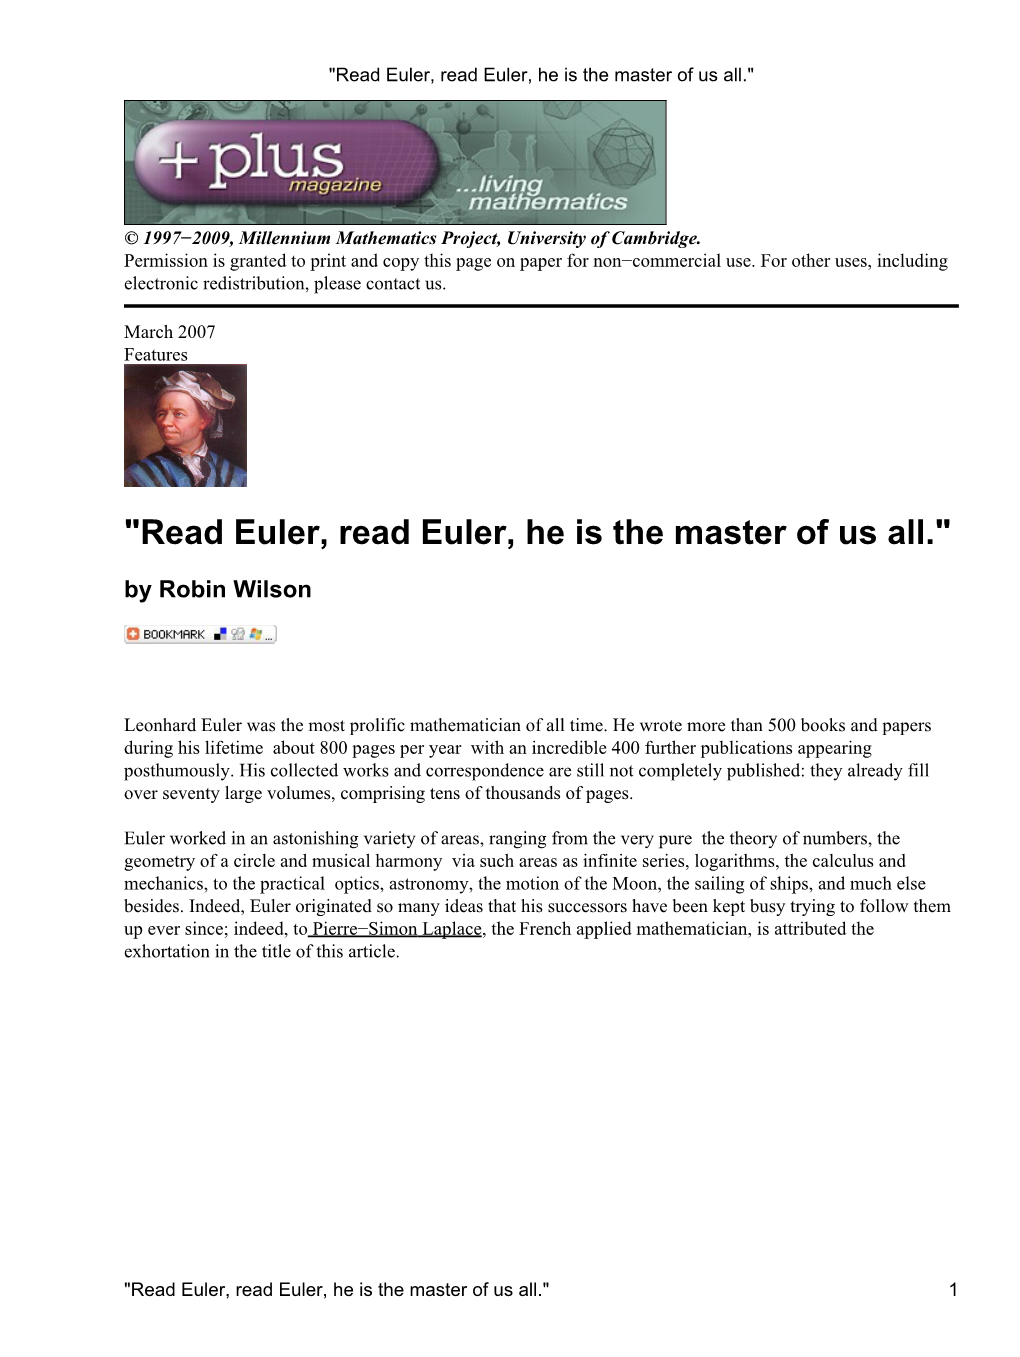 "Read Euler, Read Euler, He Is the Master of Us All."